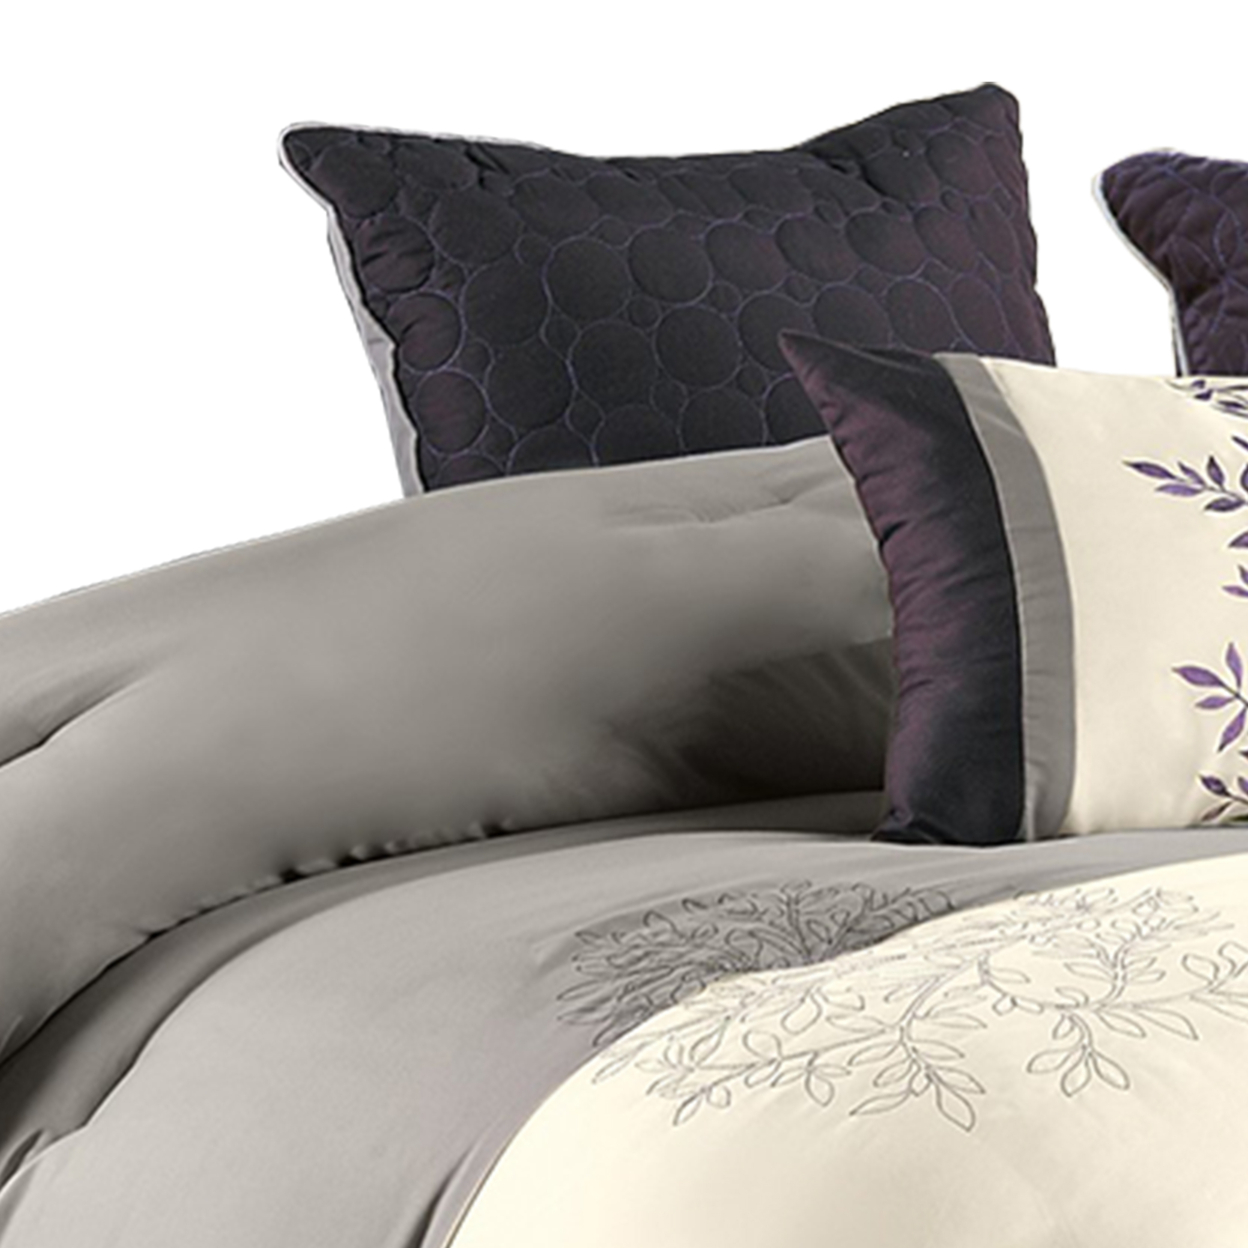 7 Piece King Polyester Comforter Set With Leaf Embroidery, Gray And Purple- Saltoro Sherpi